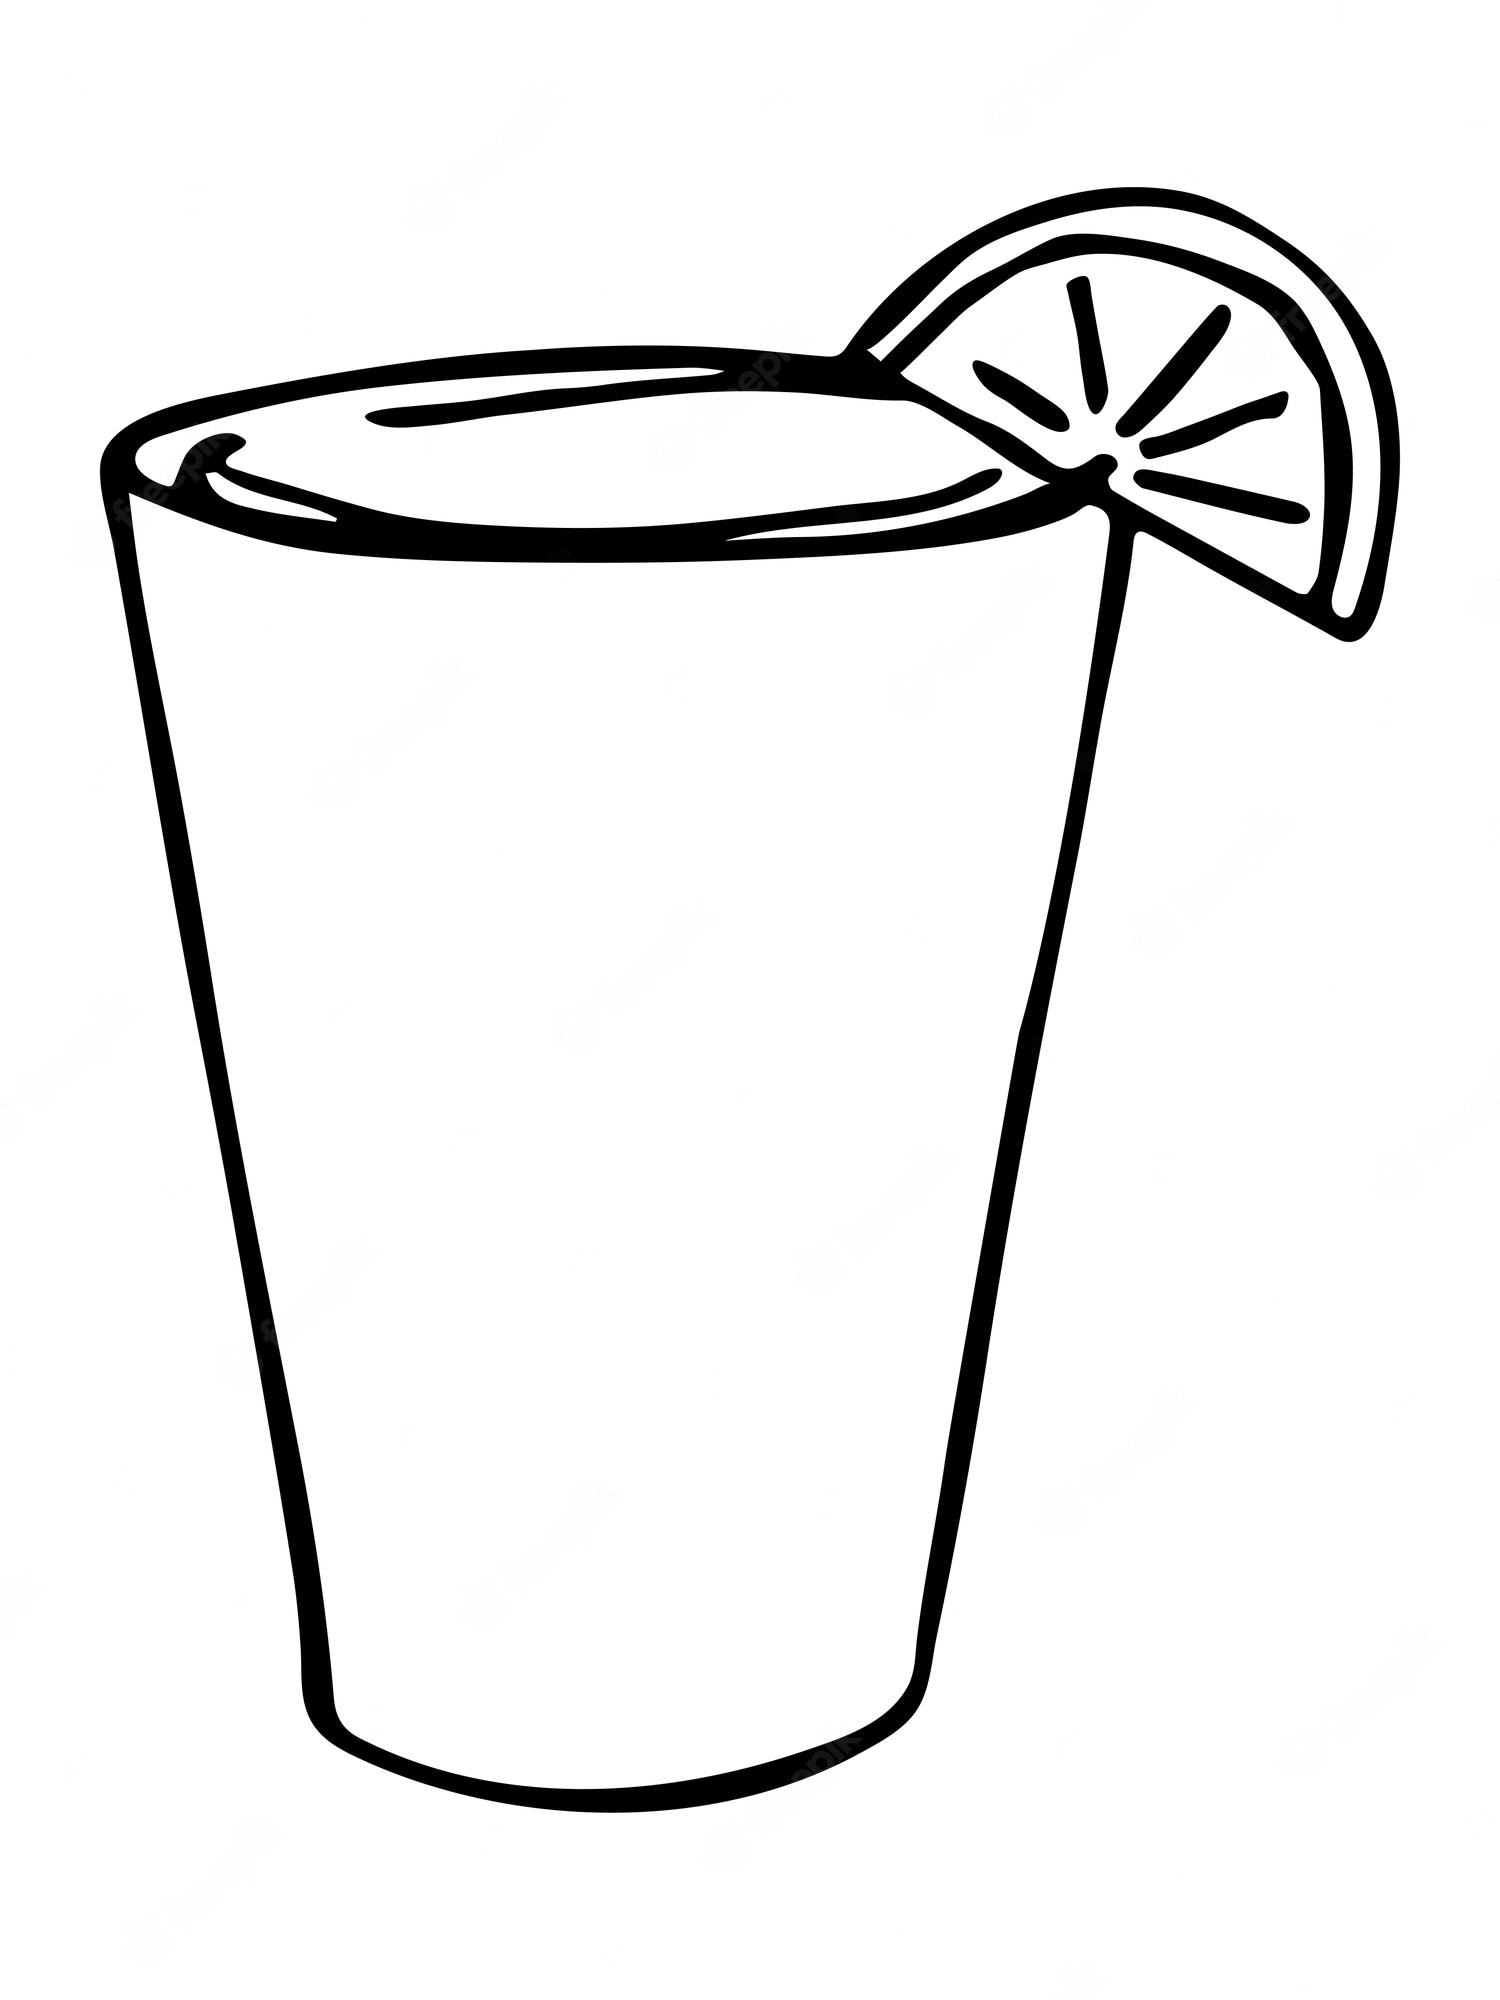 Glass of Soda Clip Art Image - Clipart Library - Clip Art Library